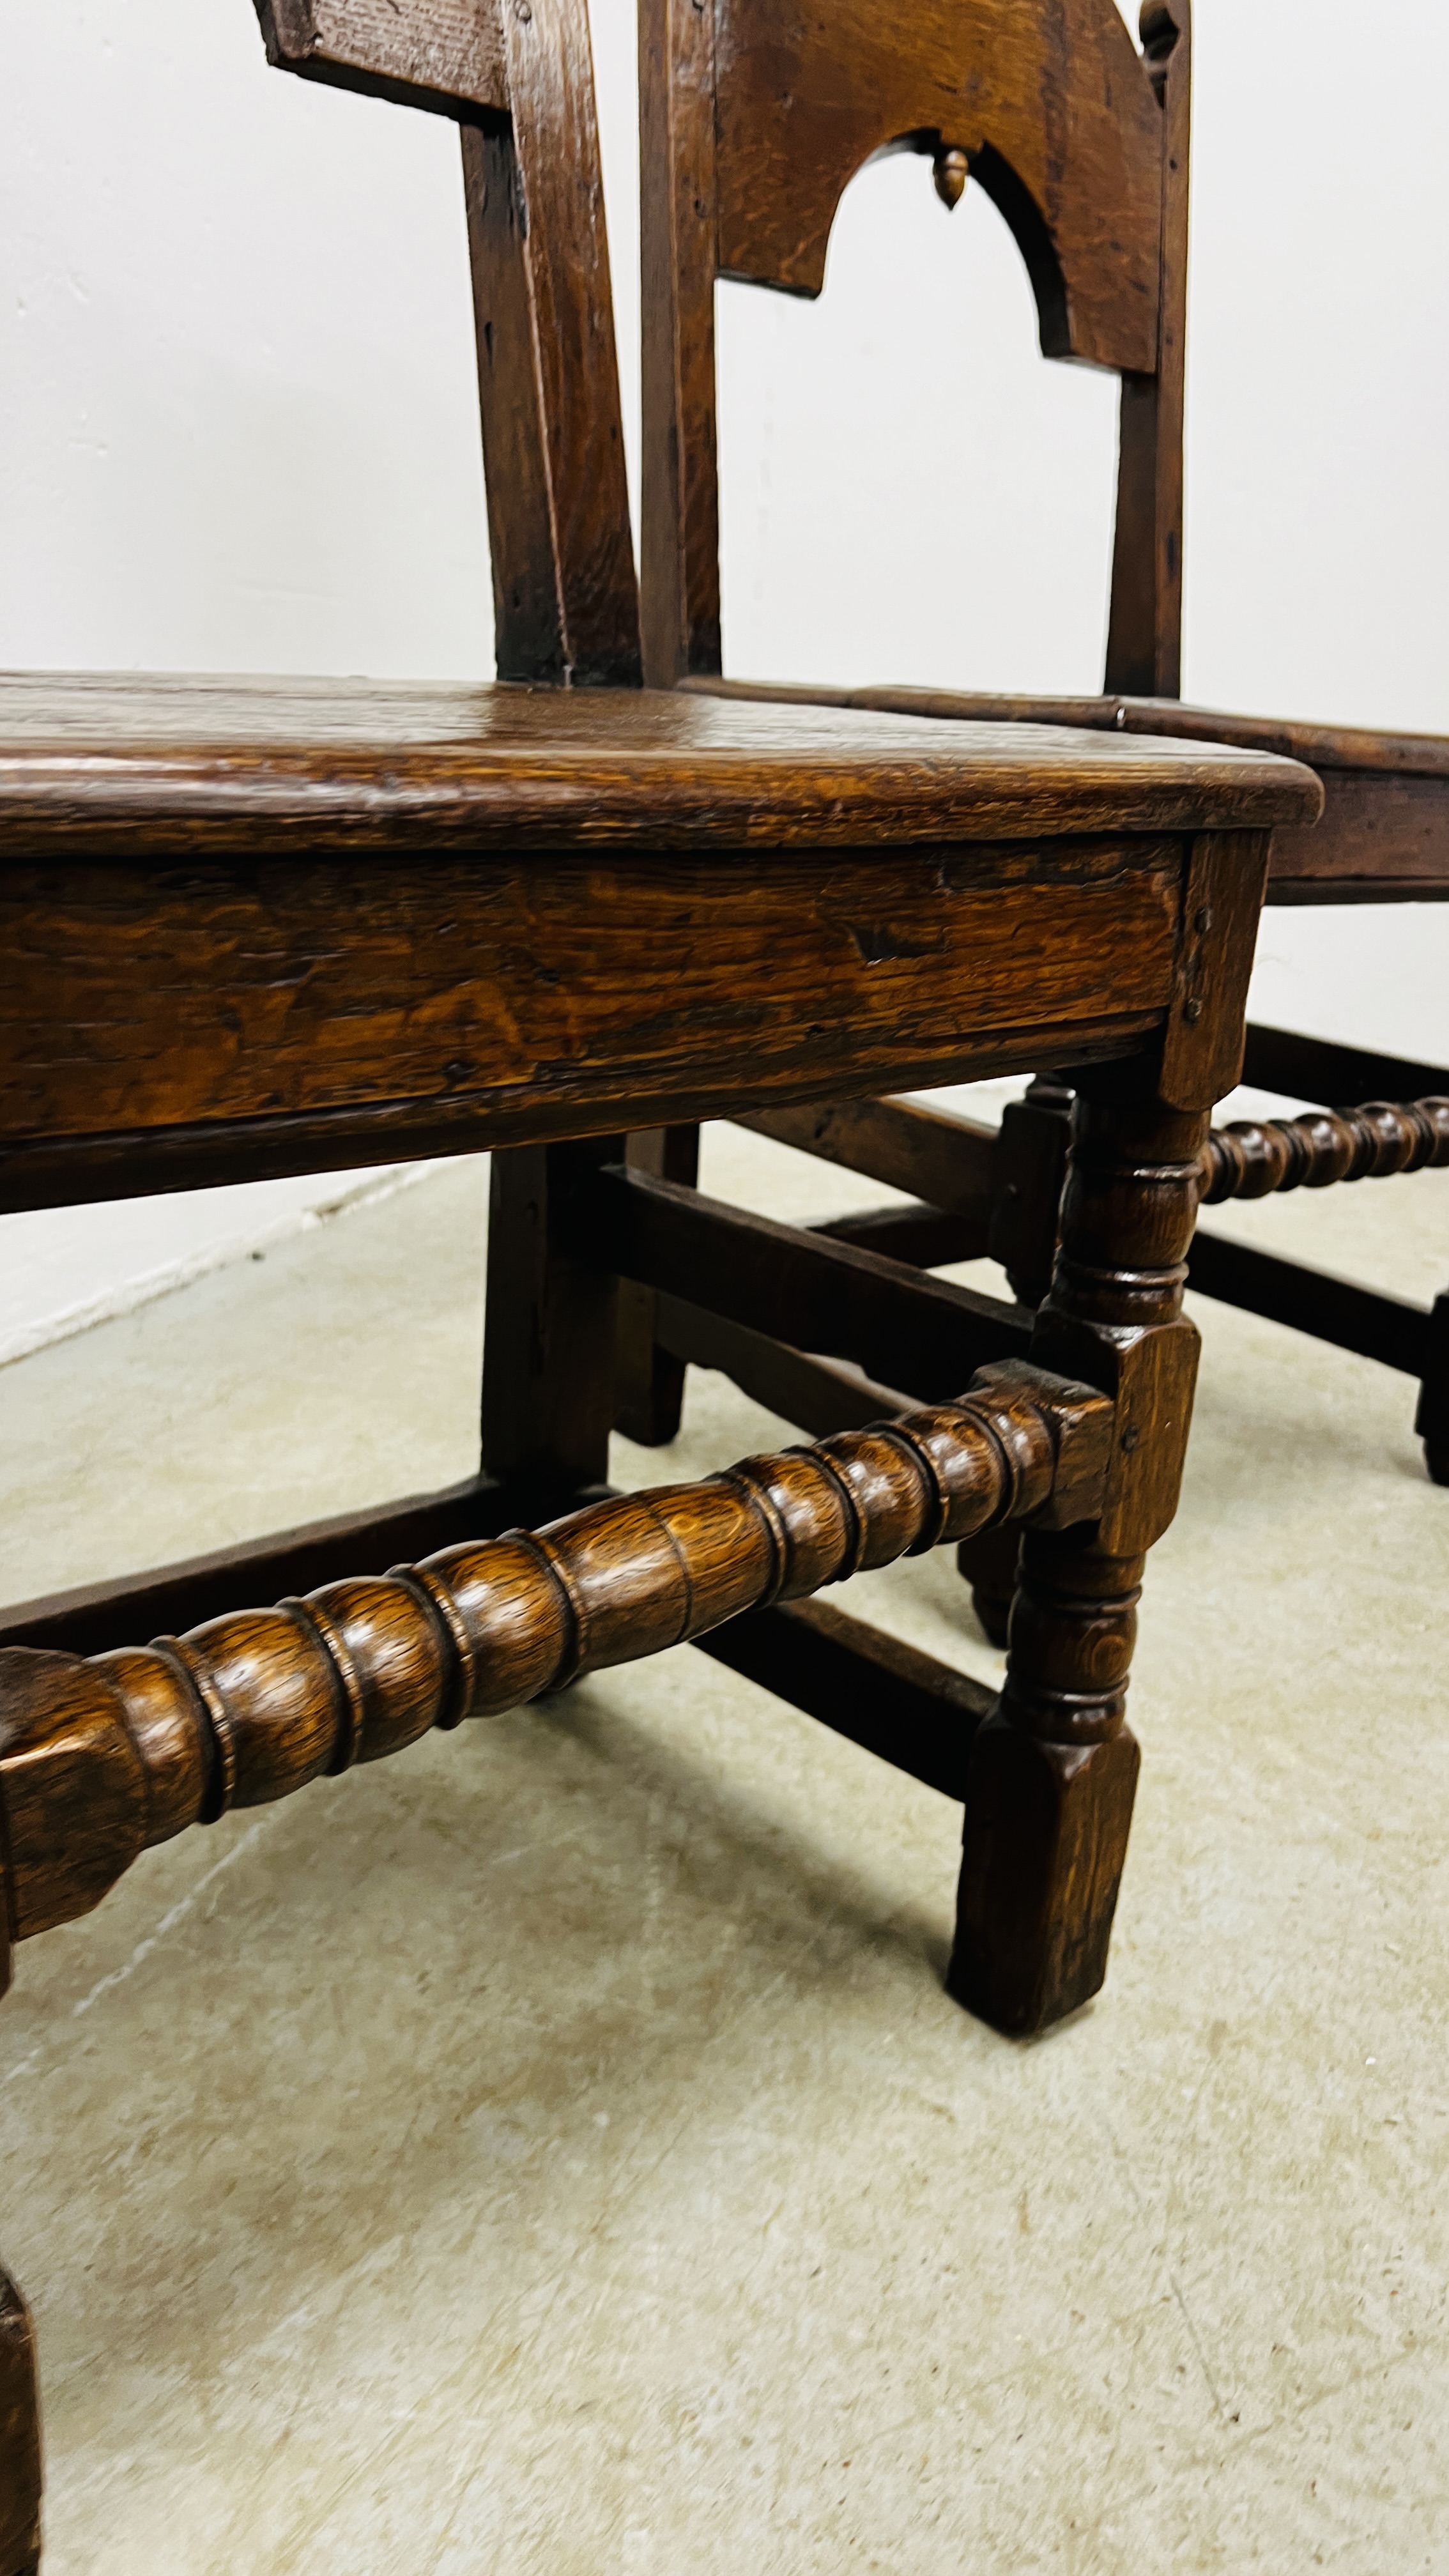 A PAIR OF 17TH CENTURY JOINED OAK CHAIRS, POSSIBLY NORTH COUNTRY. - Image 7 of 20